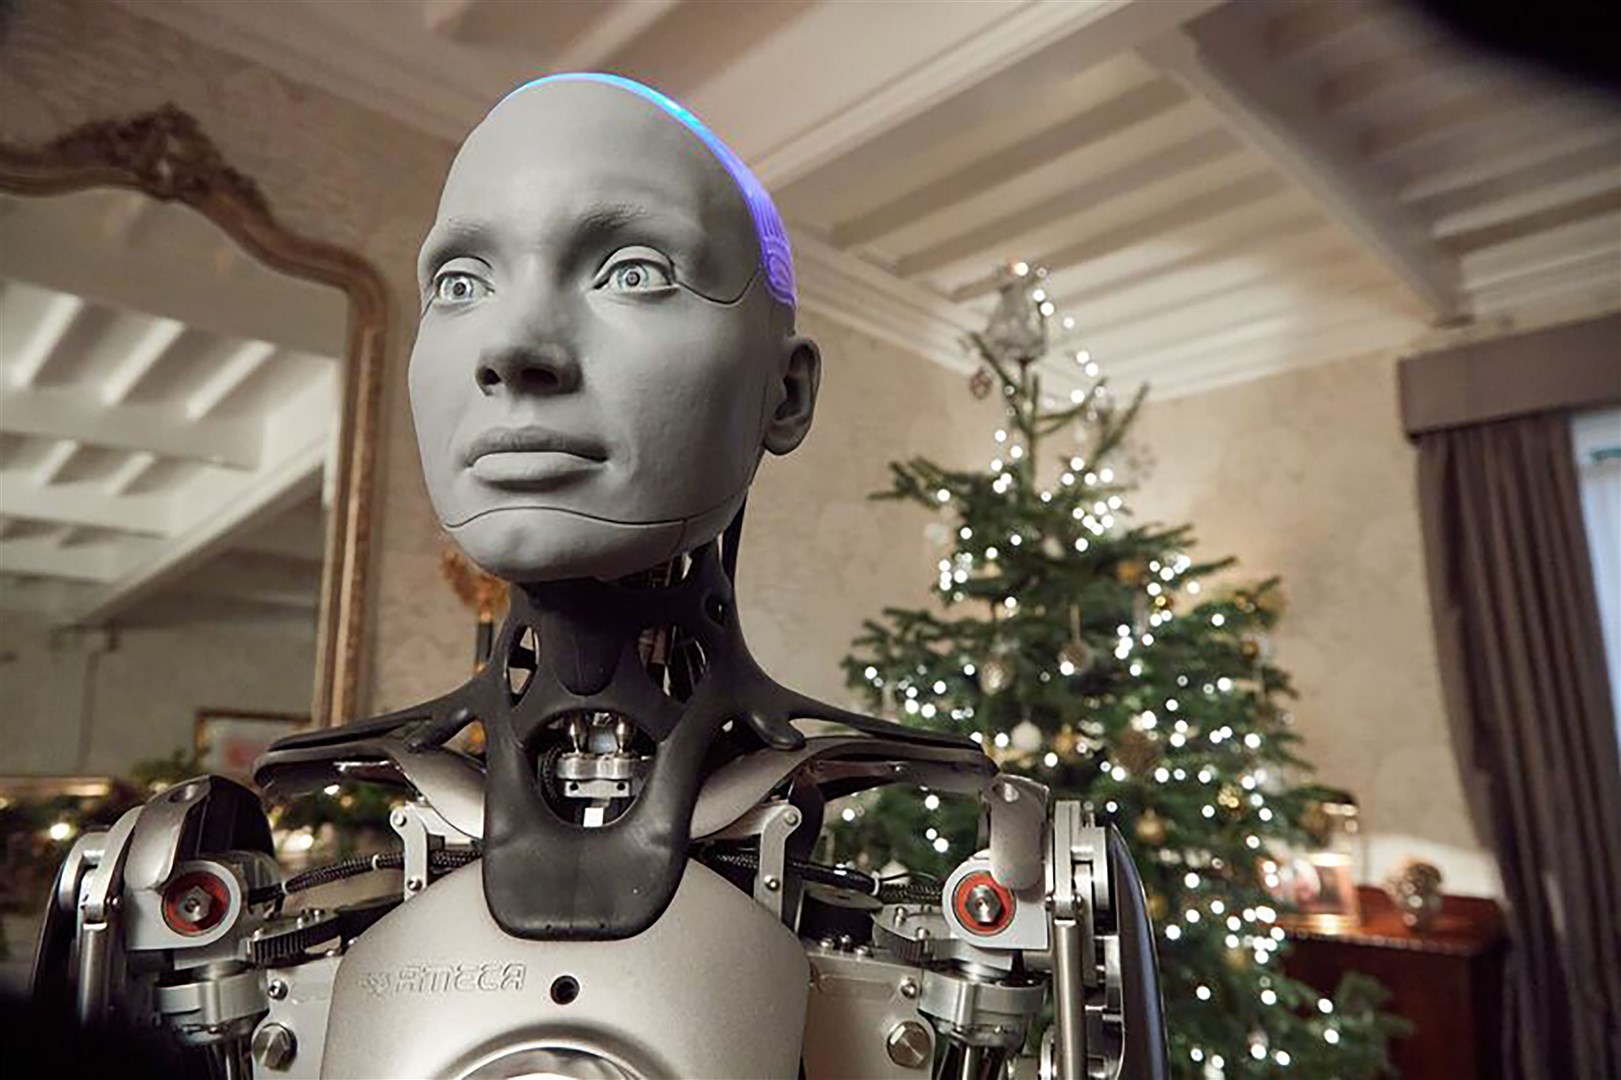 Engineered Arts’ founder Will Jackson says humanoid robots are for human interaction (Richard Ansett/Channel 4/PA)